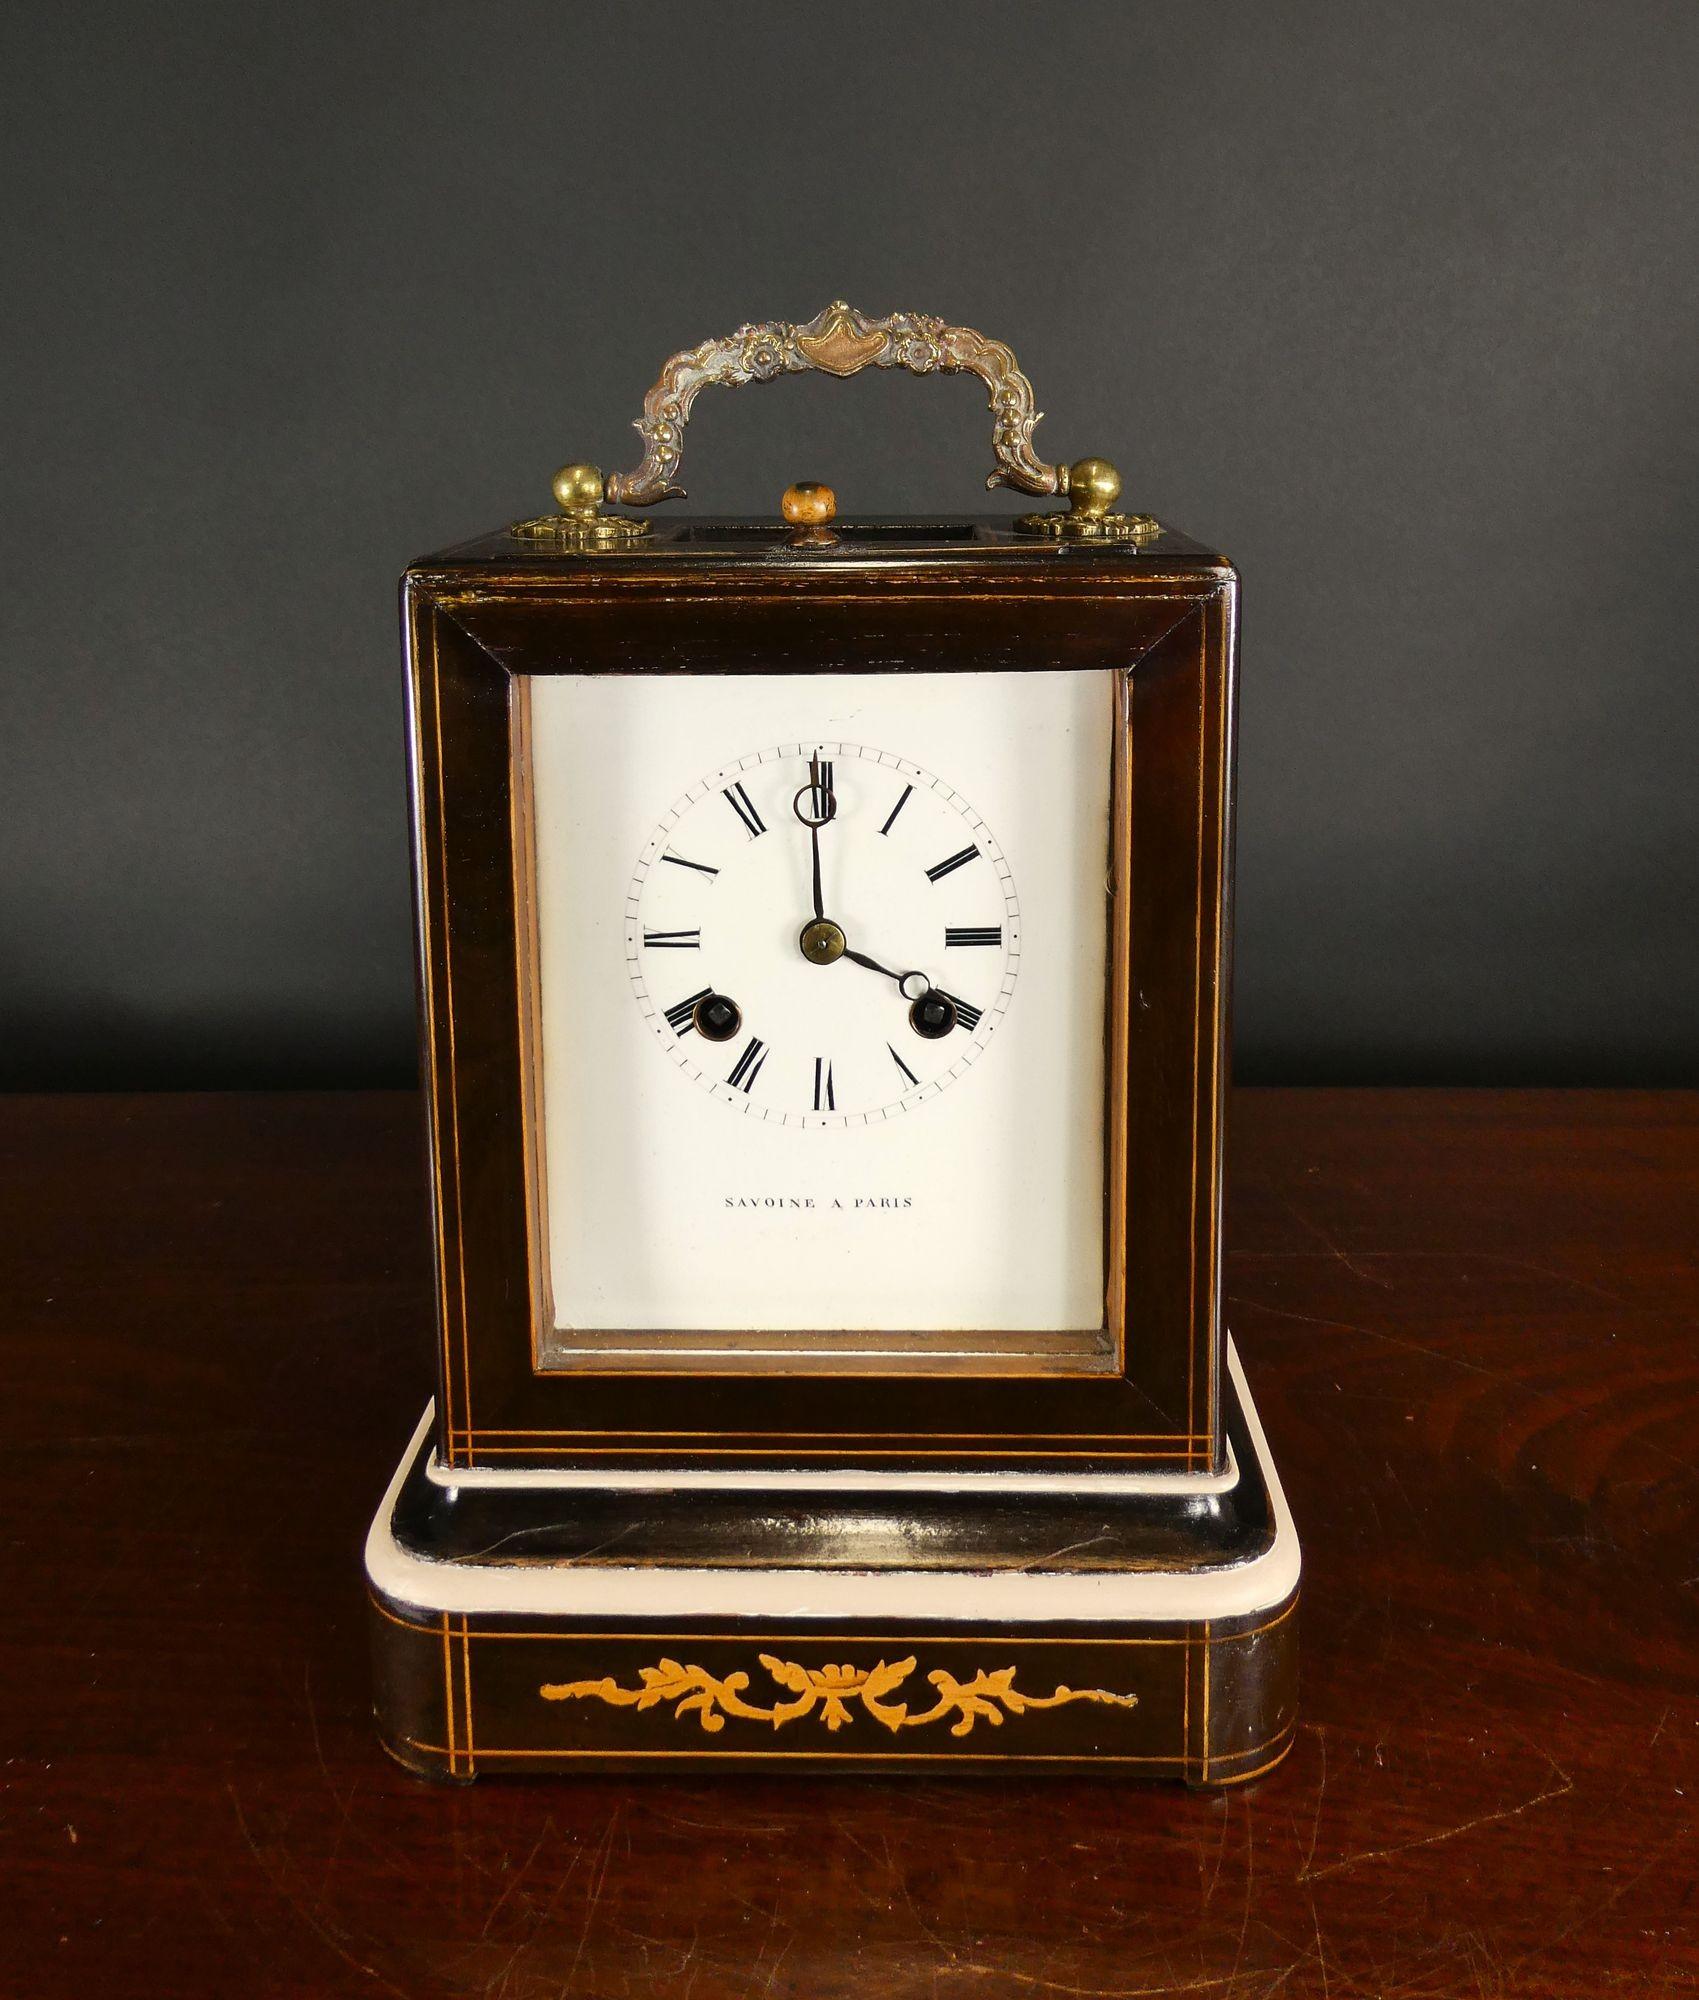 Rosewood Campaign Clock, Savoine a Paris

Rosewood campaign clock with satinwood line stringing and floral marquetry standing on a moulded plinth. Glazed viewing aperture to the to of the case and surmounted by a decorative carrying handle.
Enamel